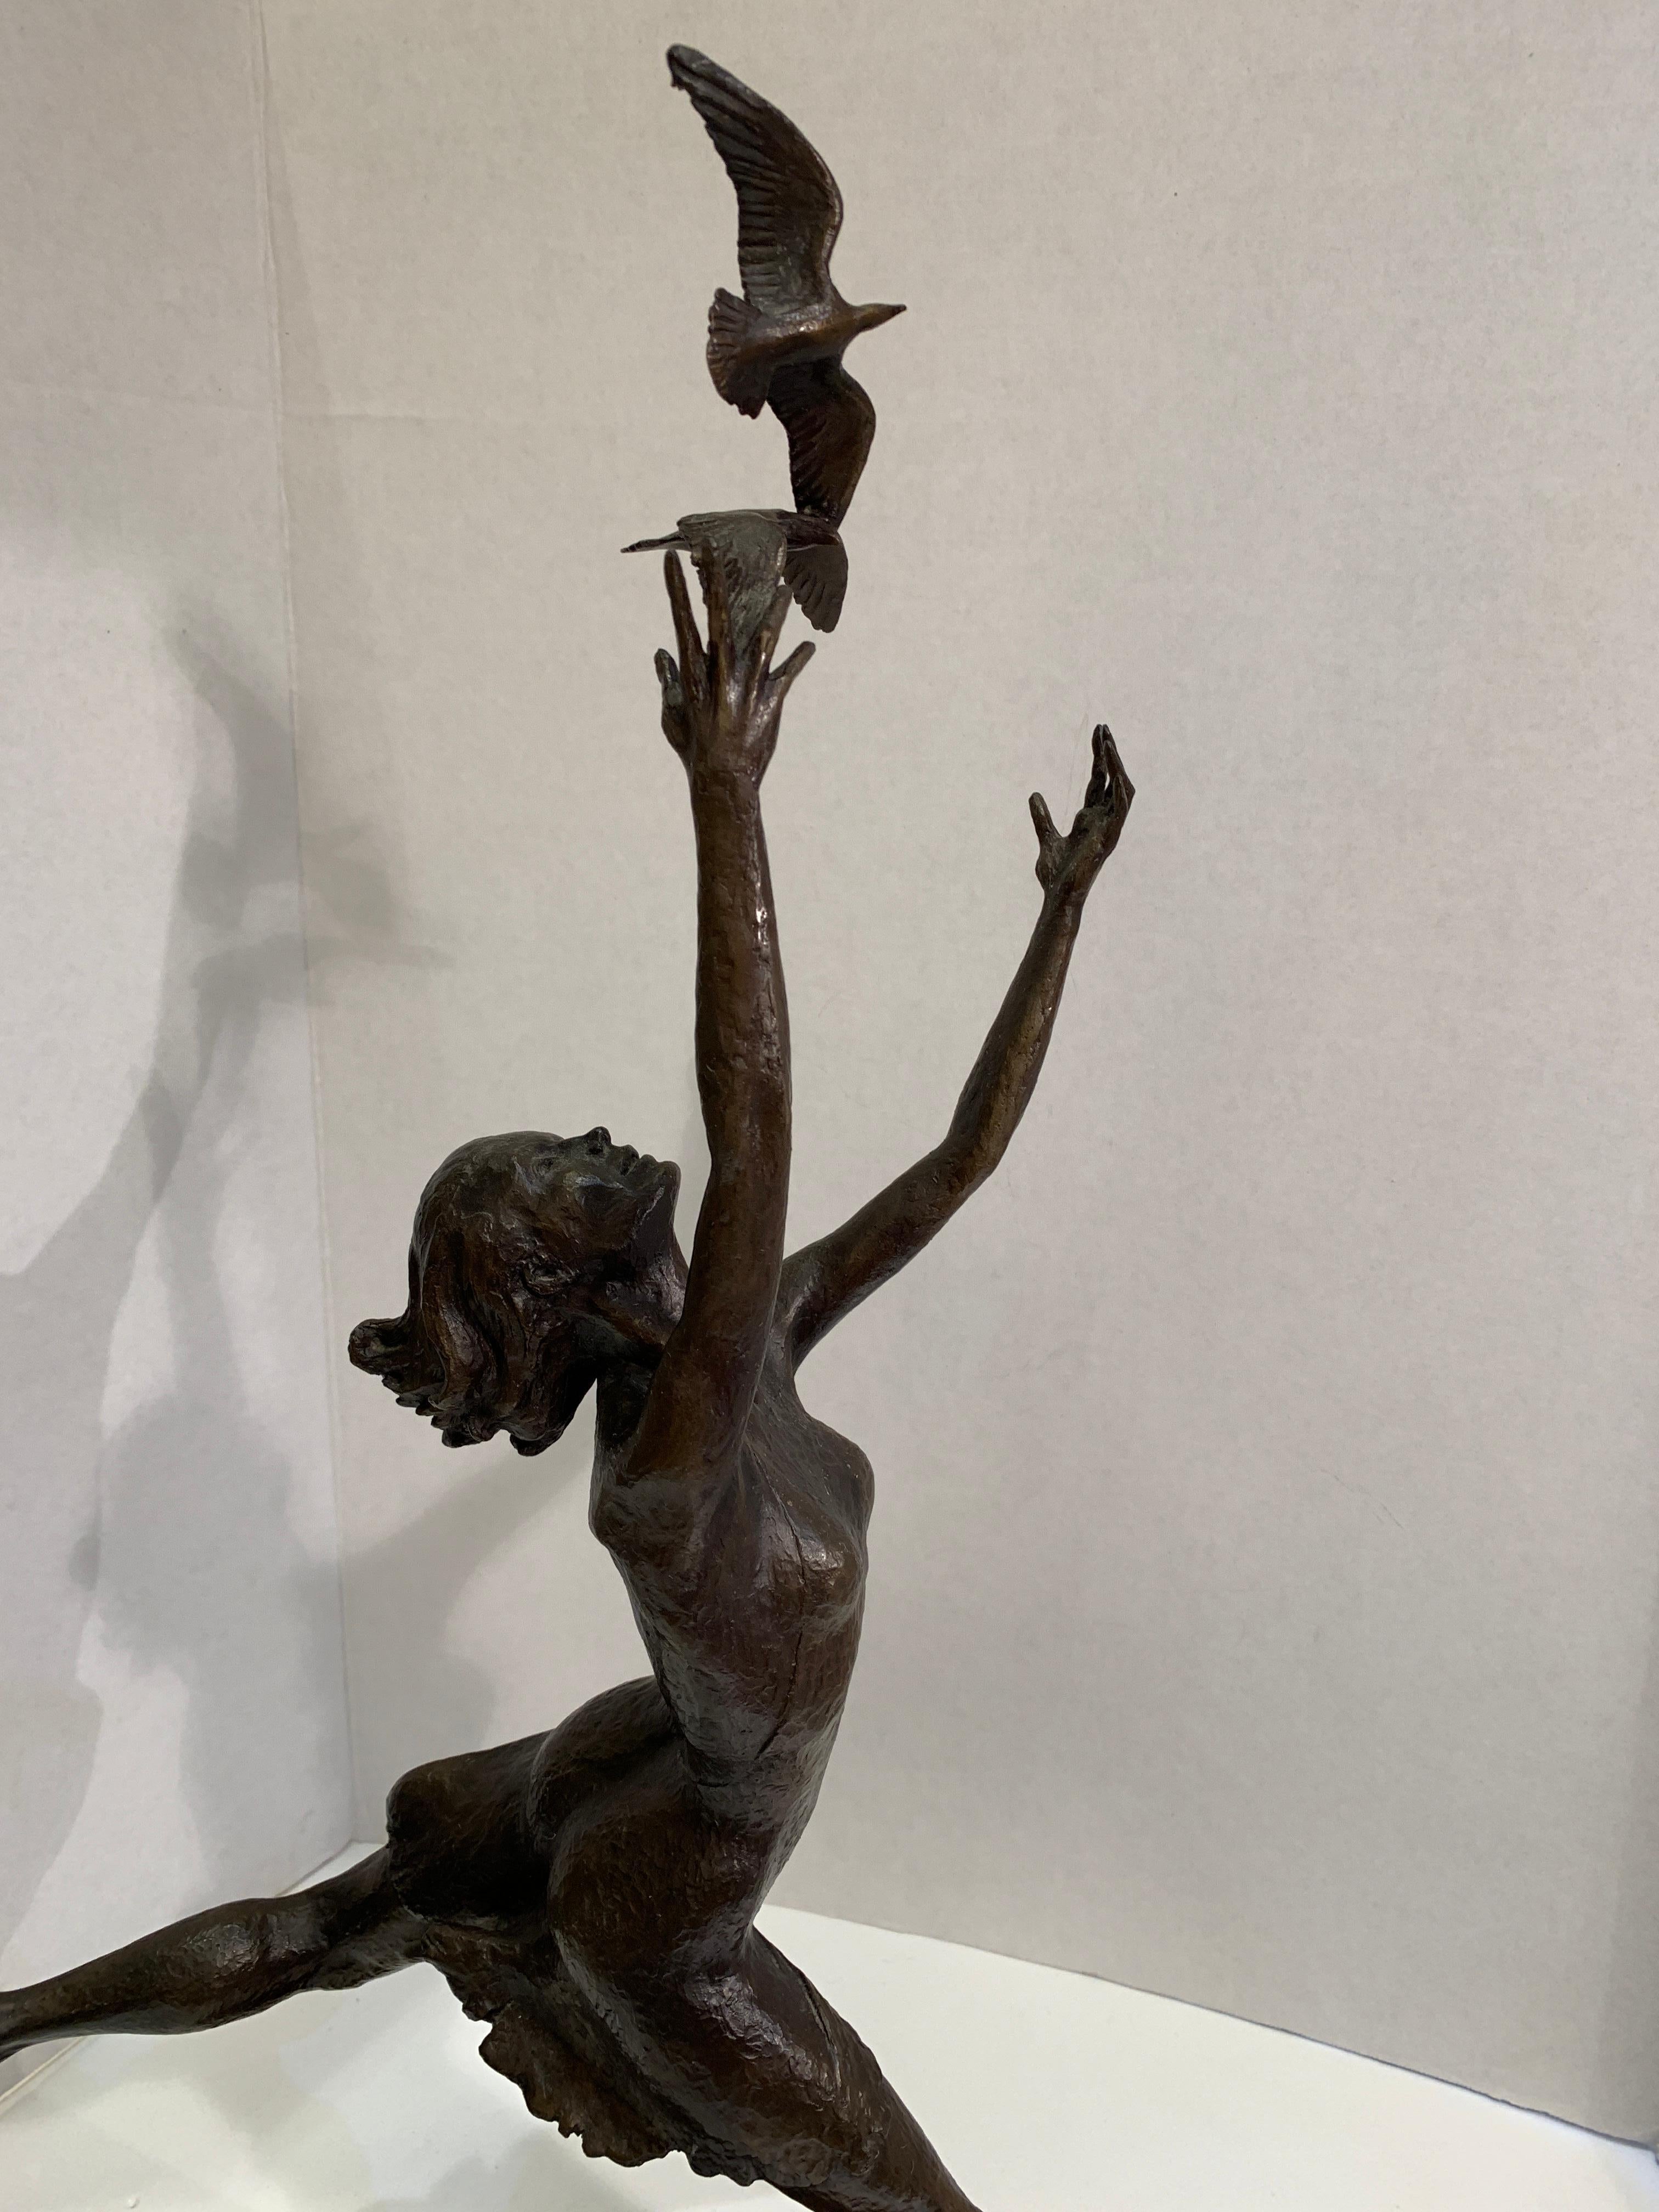 Art Deco Style Bronze Sculpture of a Woman Reaching for Seagulls by M. Young 4